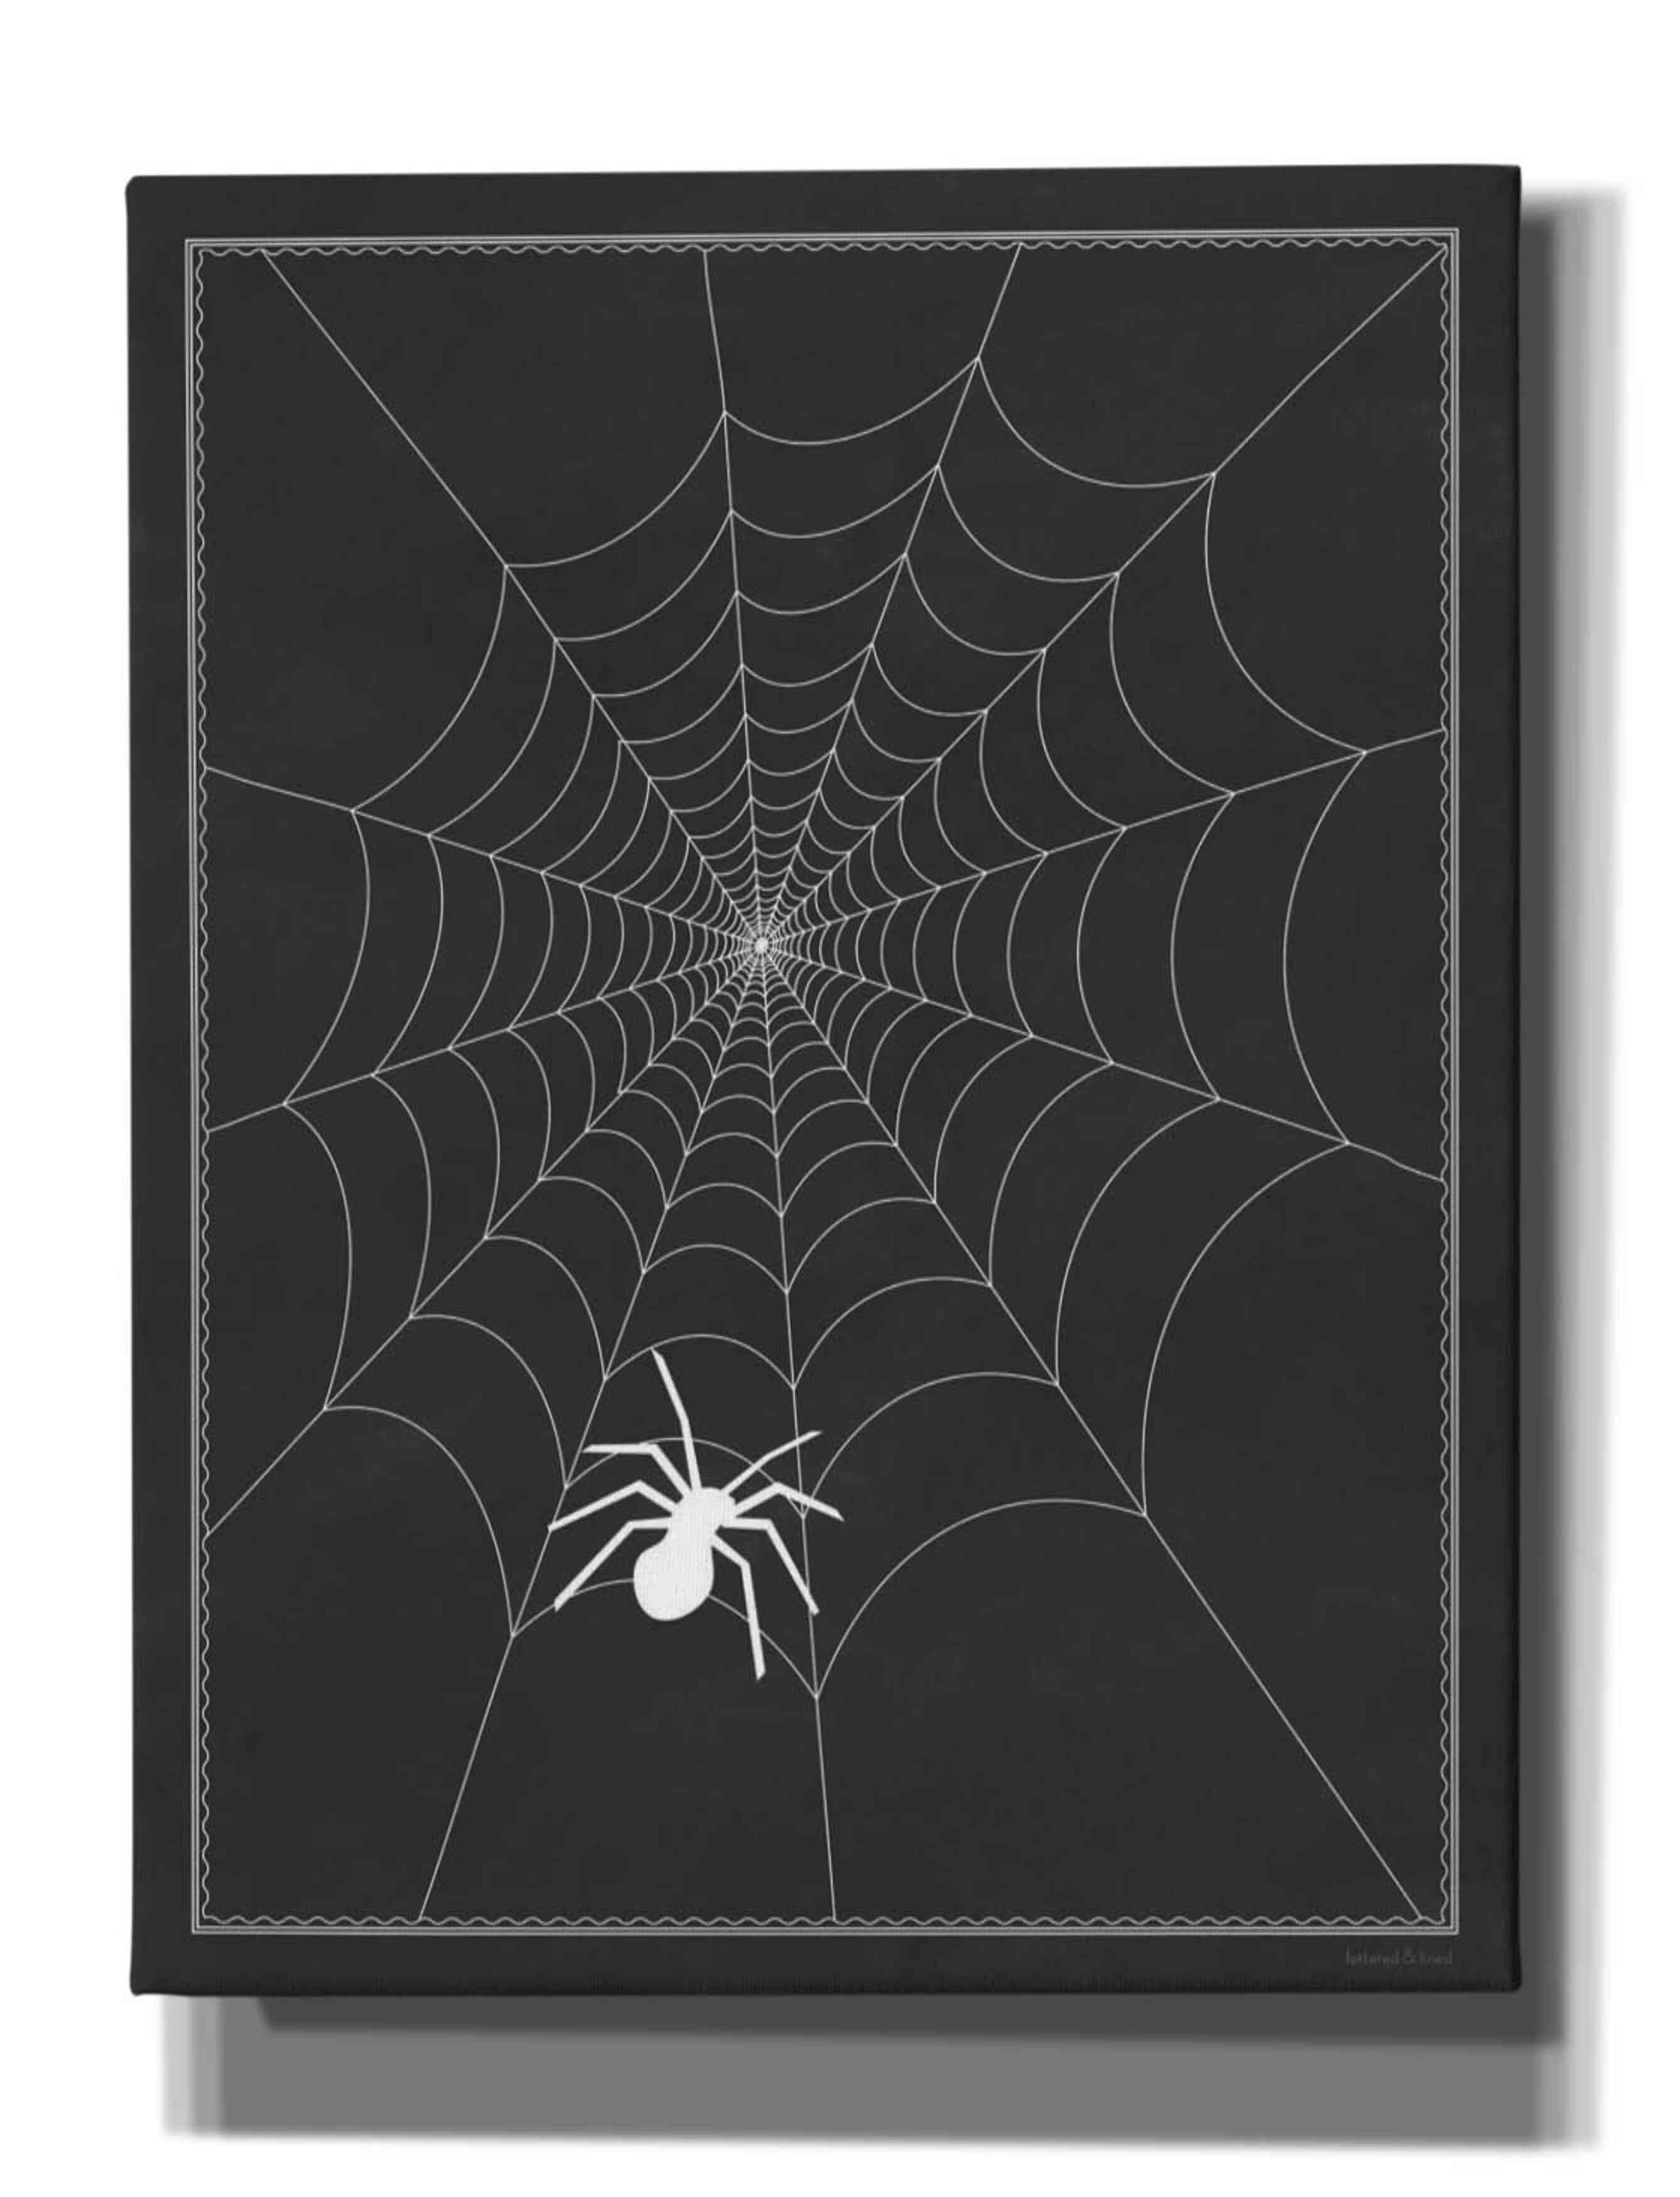 Epic Graffiti 'Spider Web II' by Lettered  Lined, Giclee Canvas Wall Art,  26